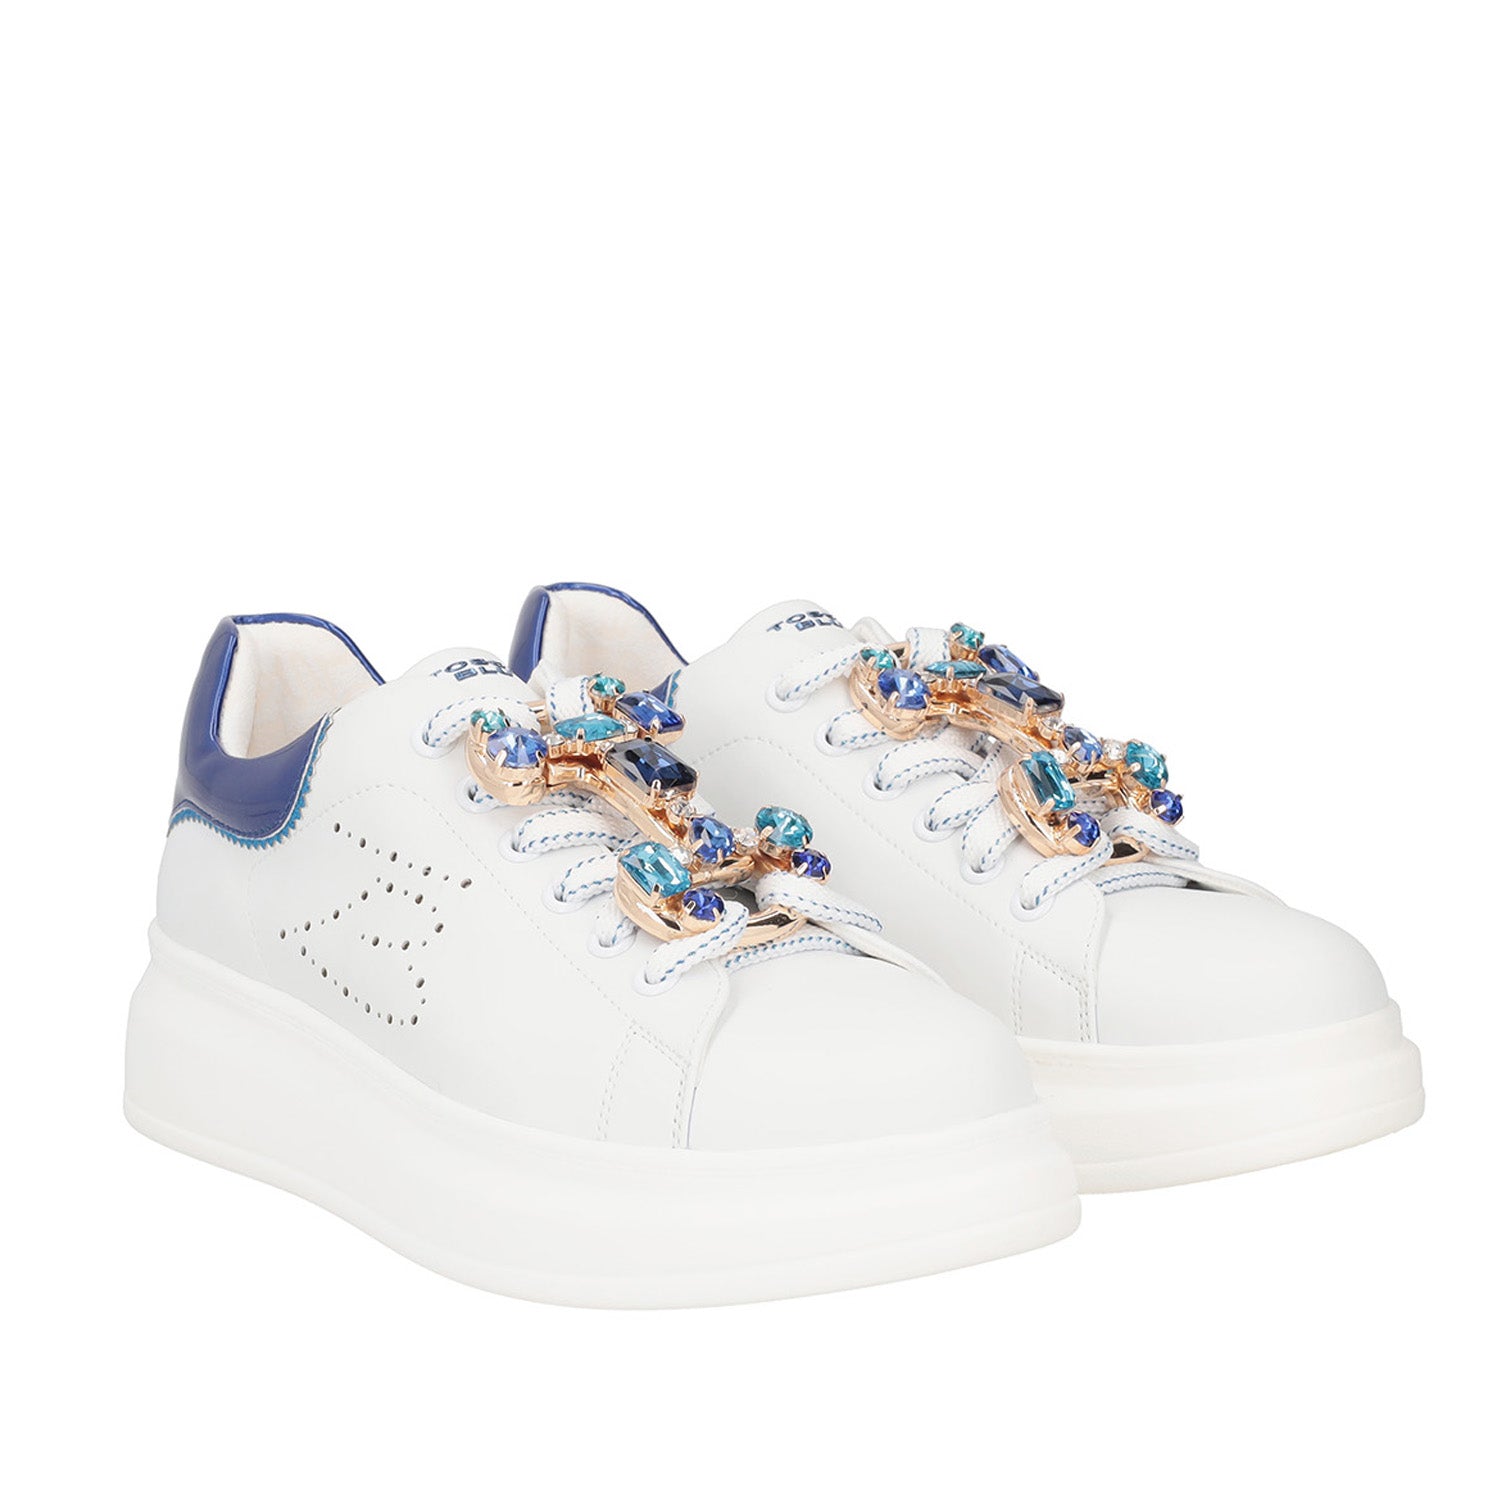 BIANCO/BLUETTE GLAMOUR SNEAKER WITH JEWEL ACCESSORY